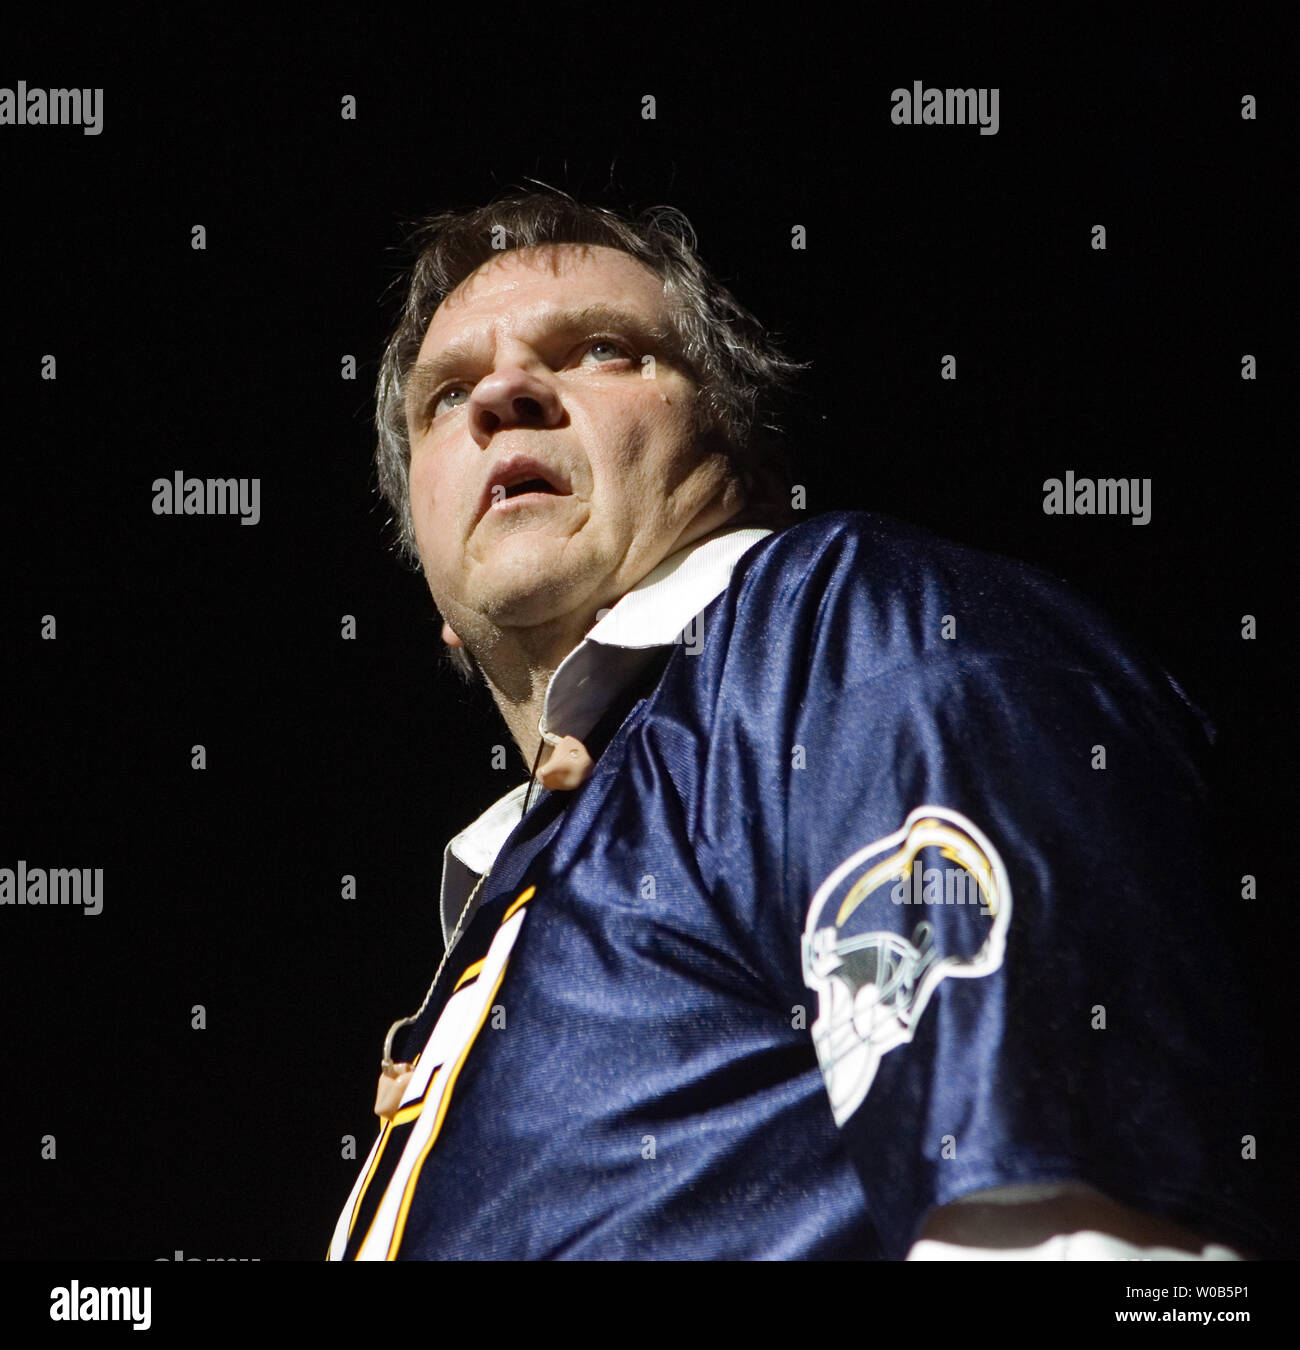 Actor and singer Meatloaf (Marvin Aday) performs at the Pacific Coliseum in Vancouver, British Columbia on March 2, 2007.  (UPI Photo/Heinz Ruckemann) Stock Photo